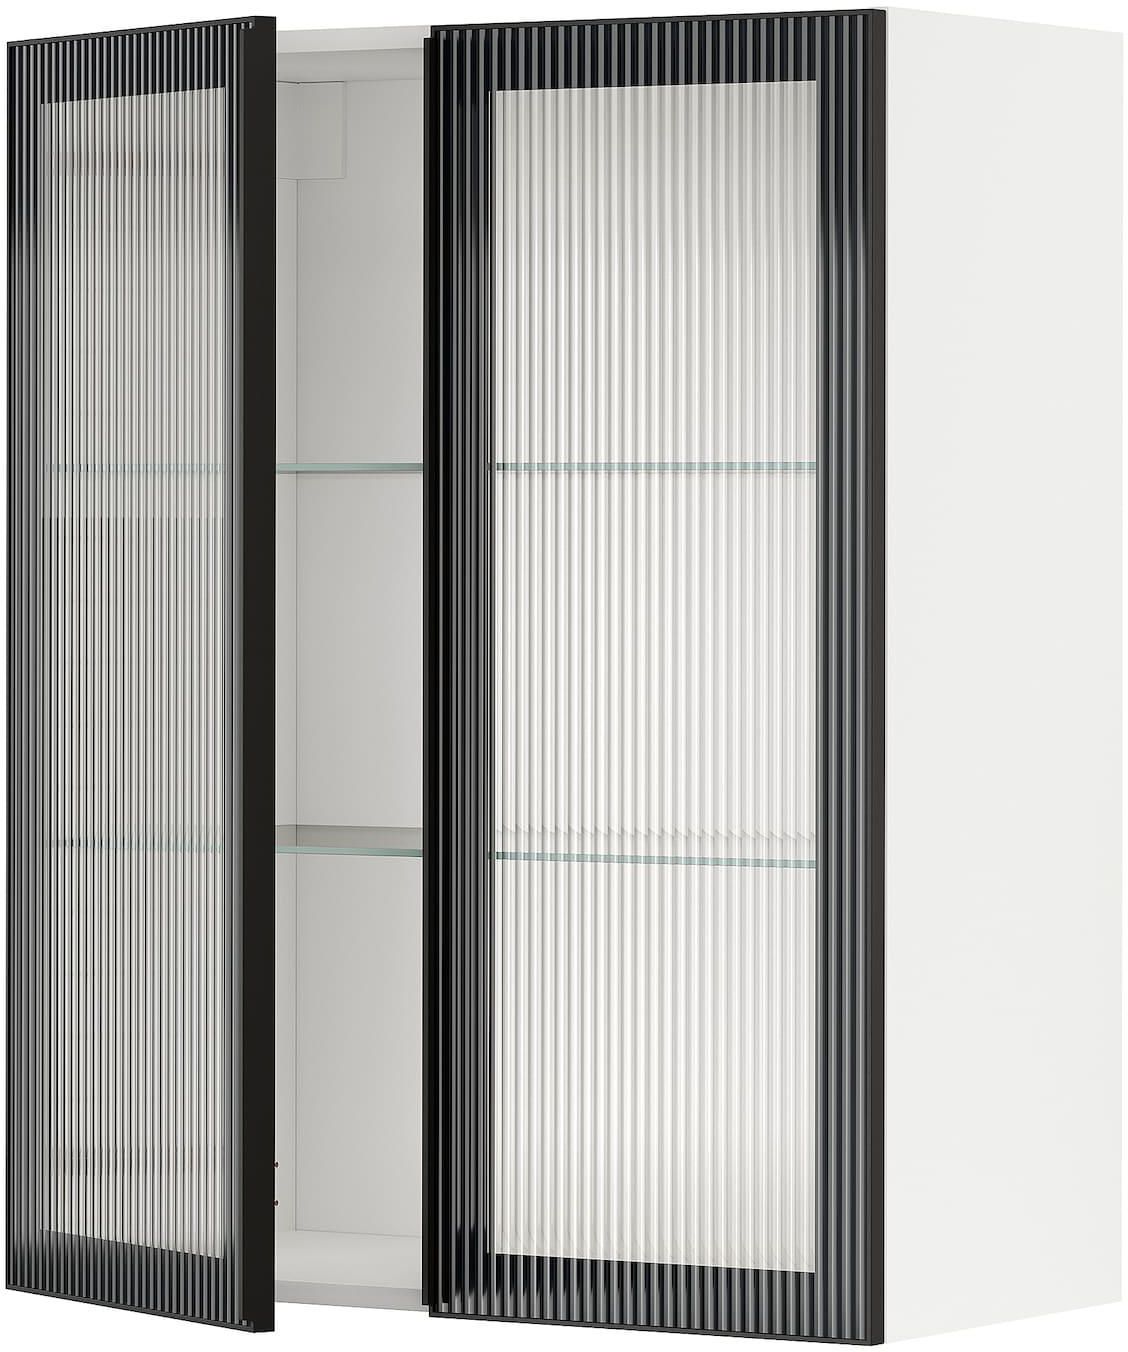 METOD Wall cabinet w shelves/2 glass drs - white/Hejsta anthracite reeded glass 80x100 cm